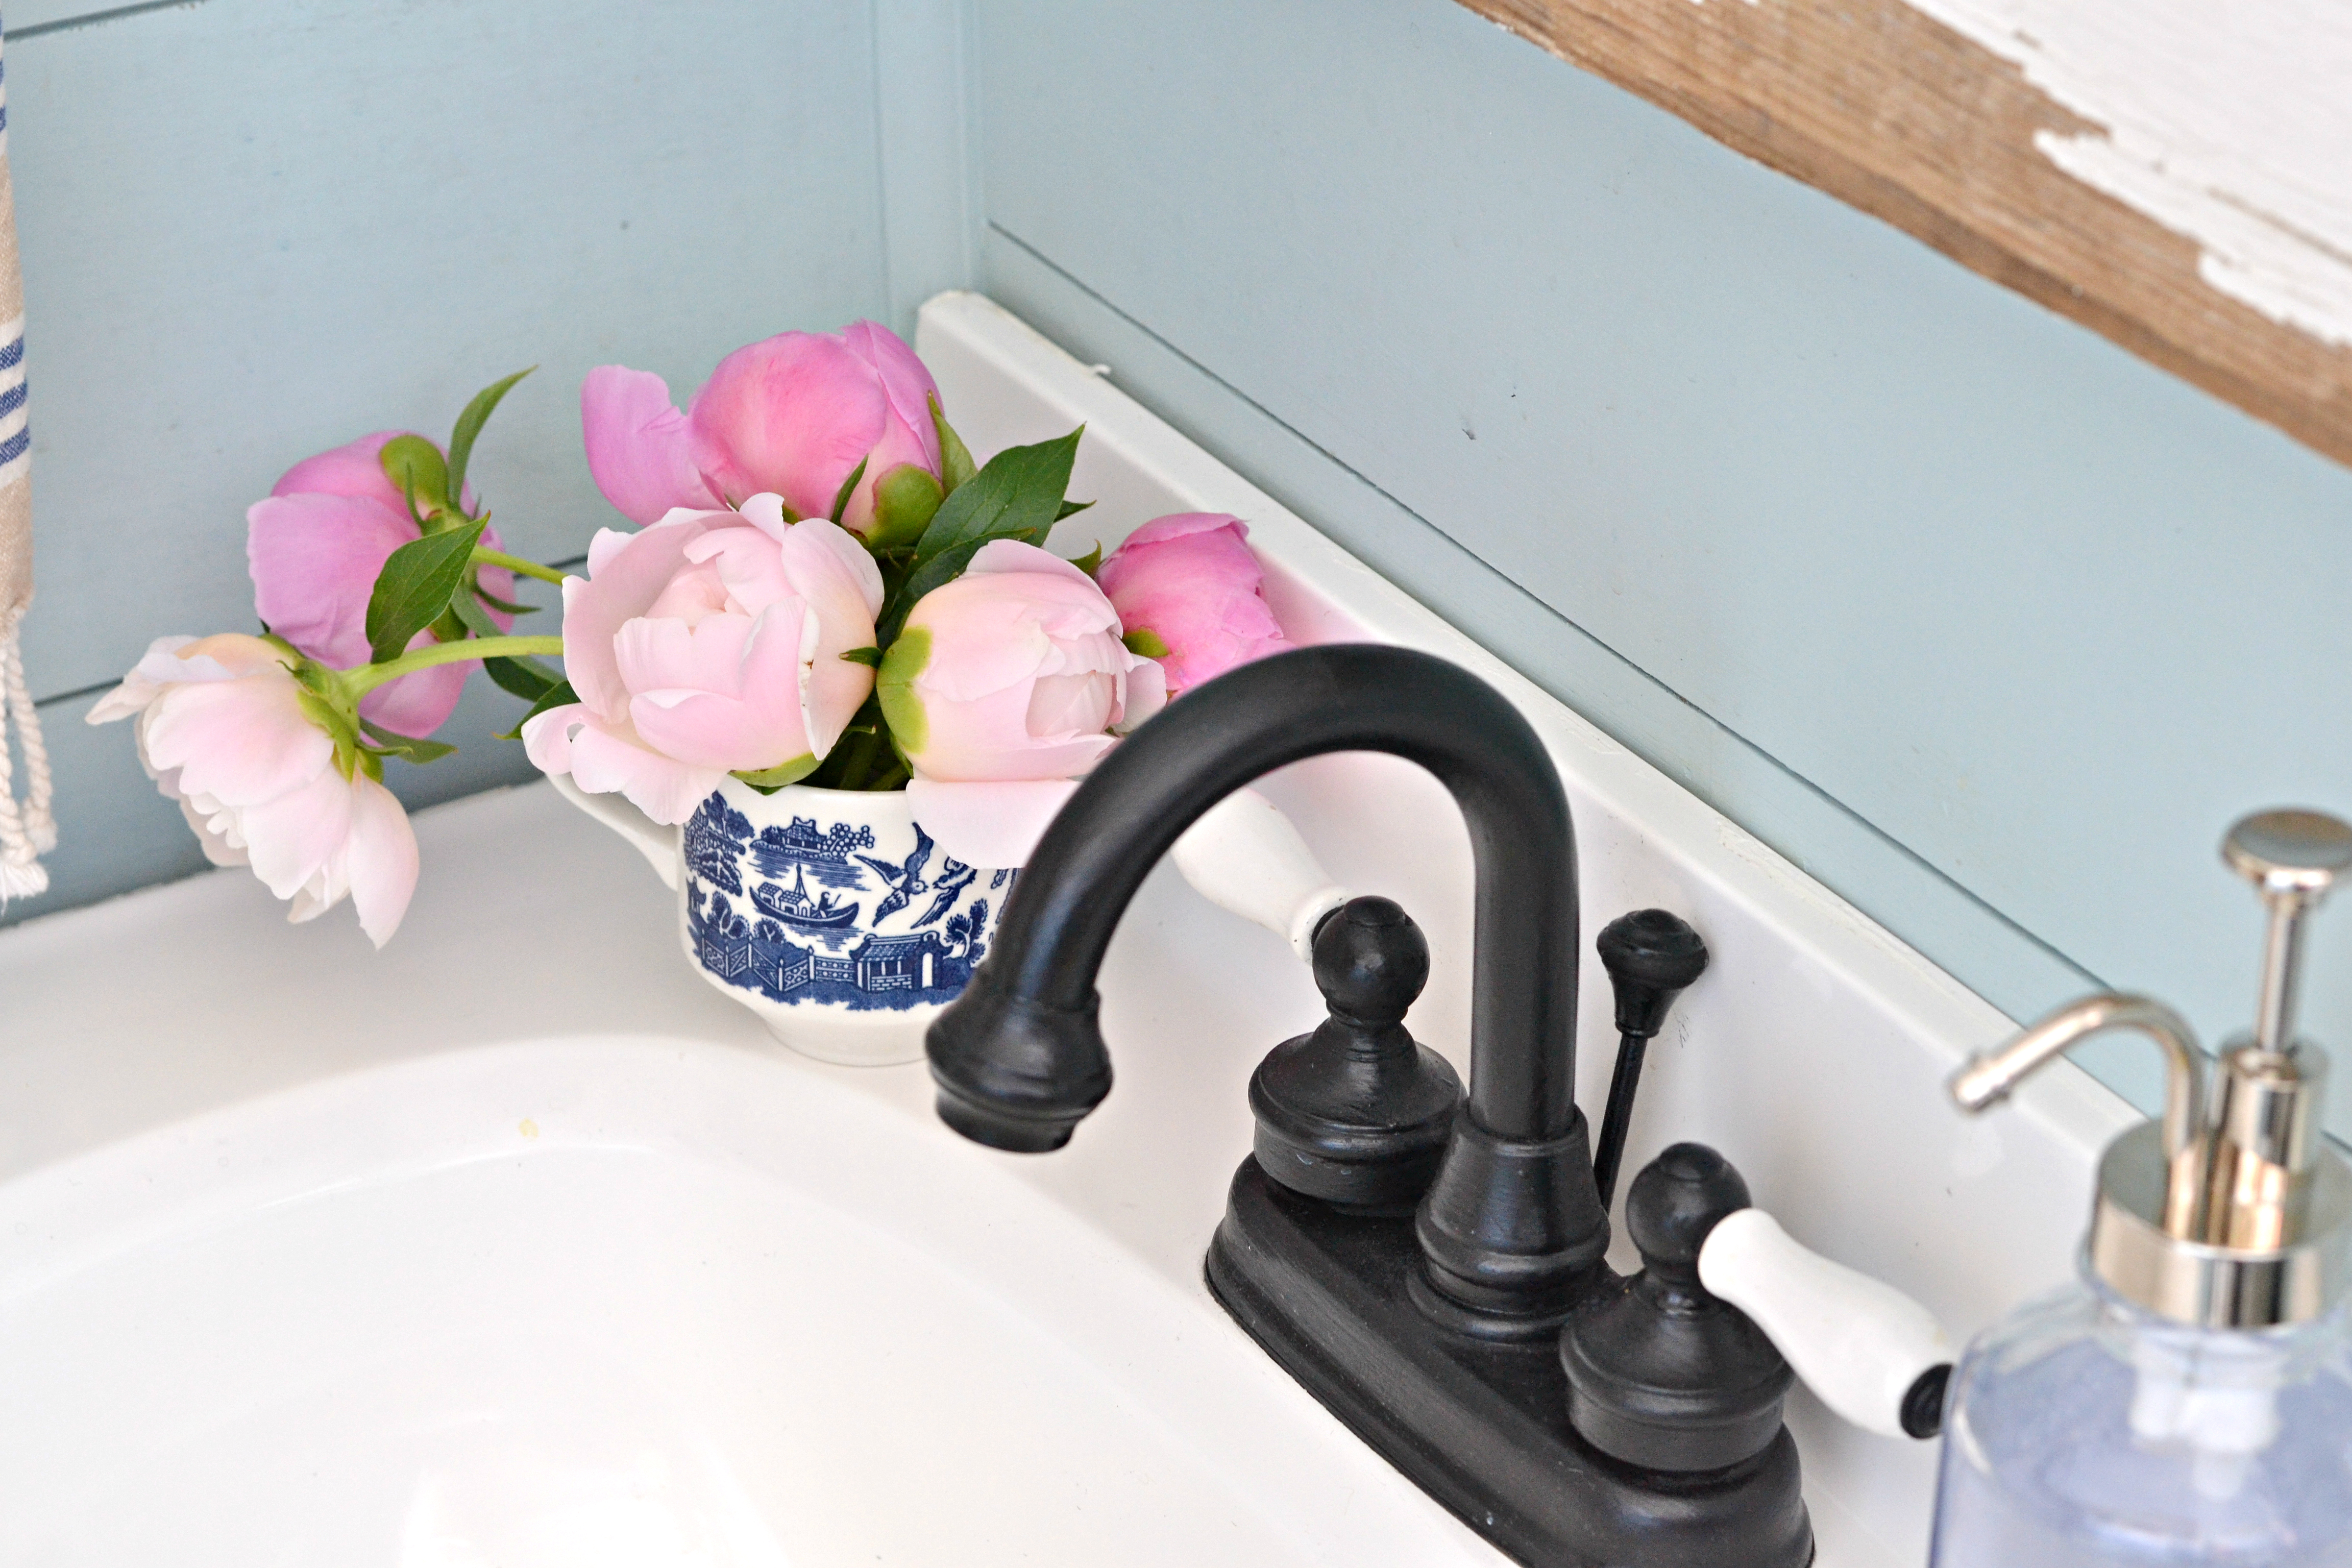 Painted Faucet In 5 Easy Steps The, Can You Use Regular Spray Paint On Bathtub Fixtures